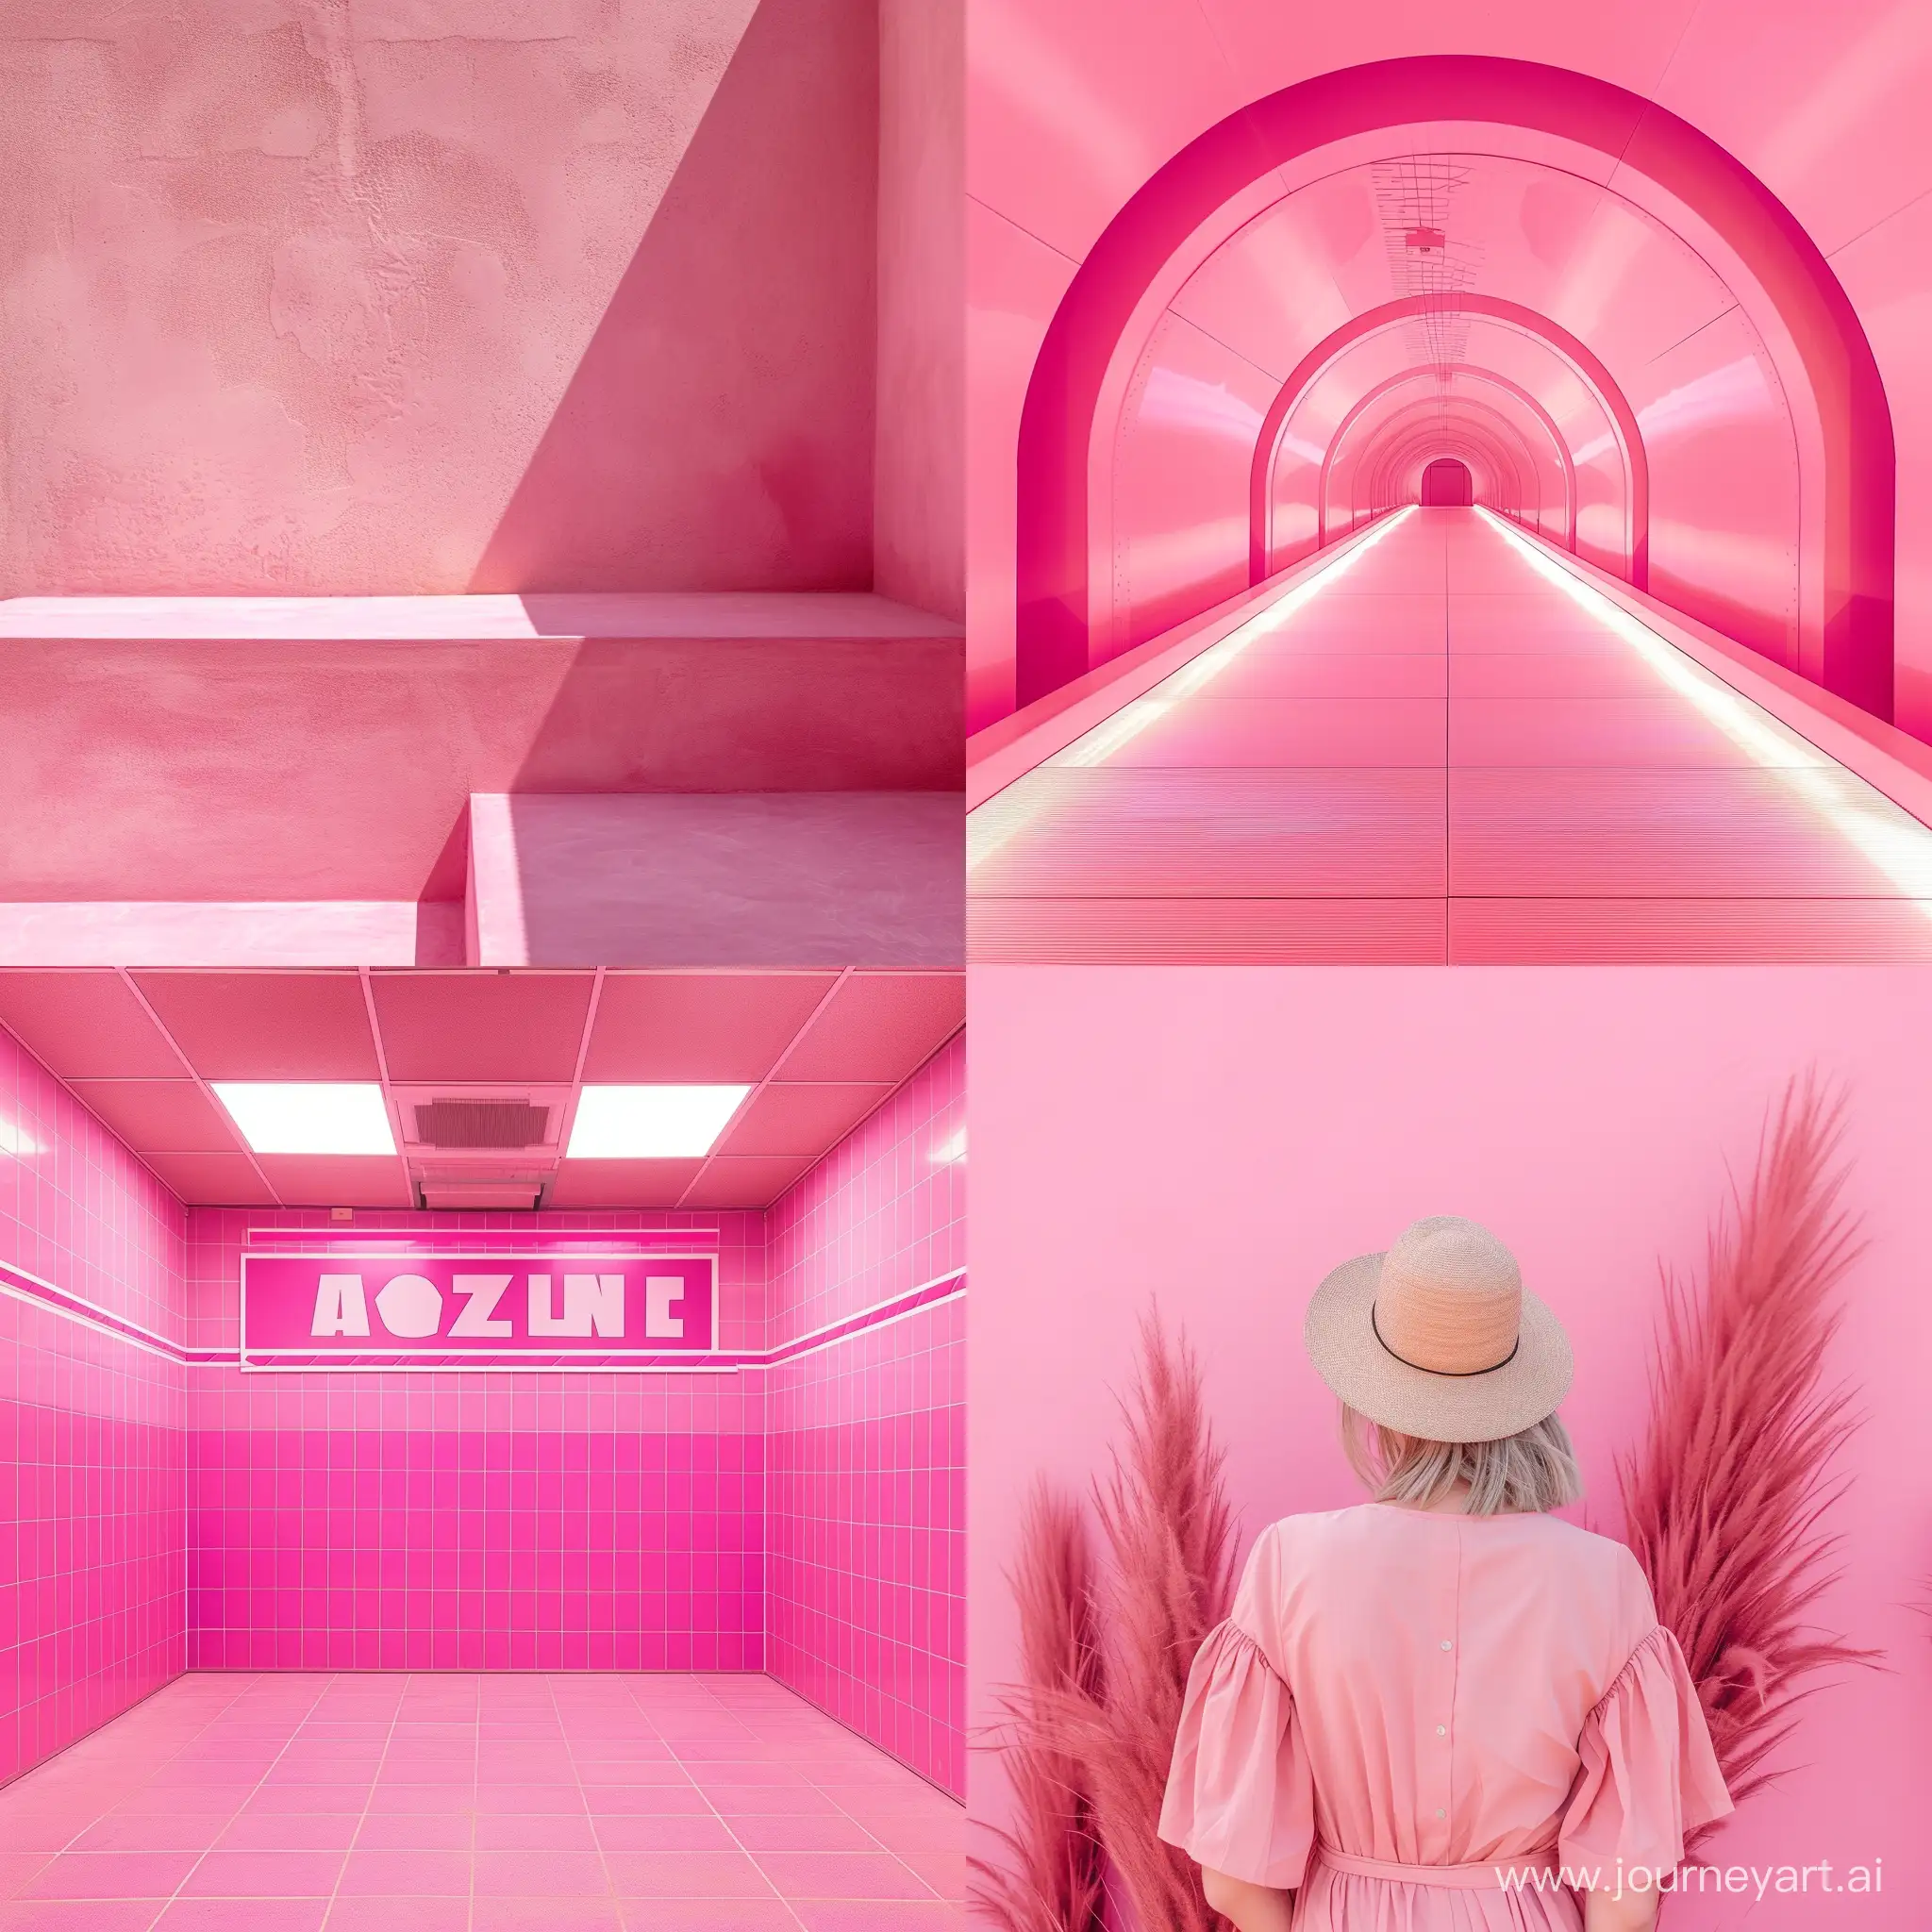 Vibrant-Pink-Photo-Zone-Creative-Visuals-in-a-Square-Frame